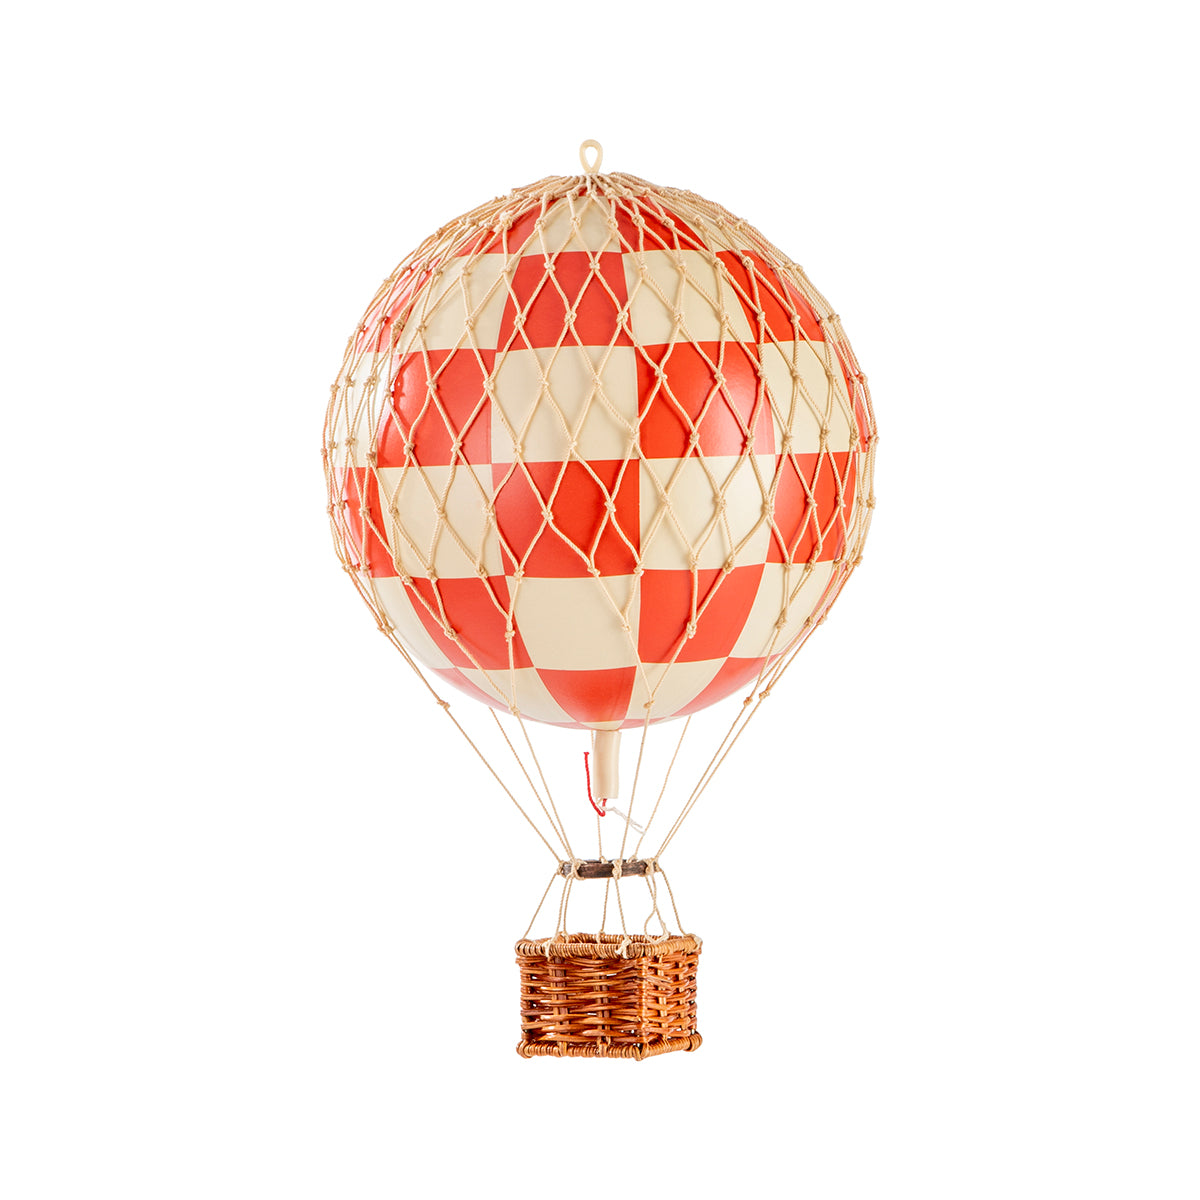 A quirky Wonderen Small Hot Air Balloon - Travels Light hot air balloon floating on a white background.